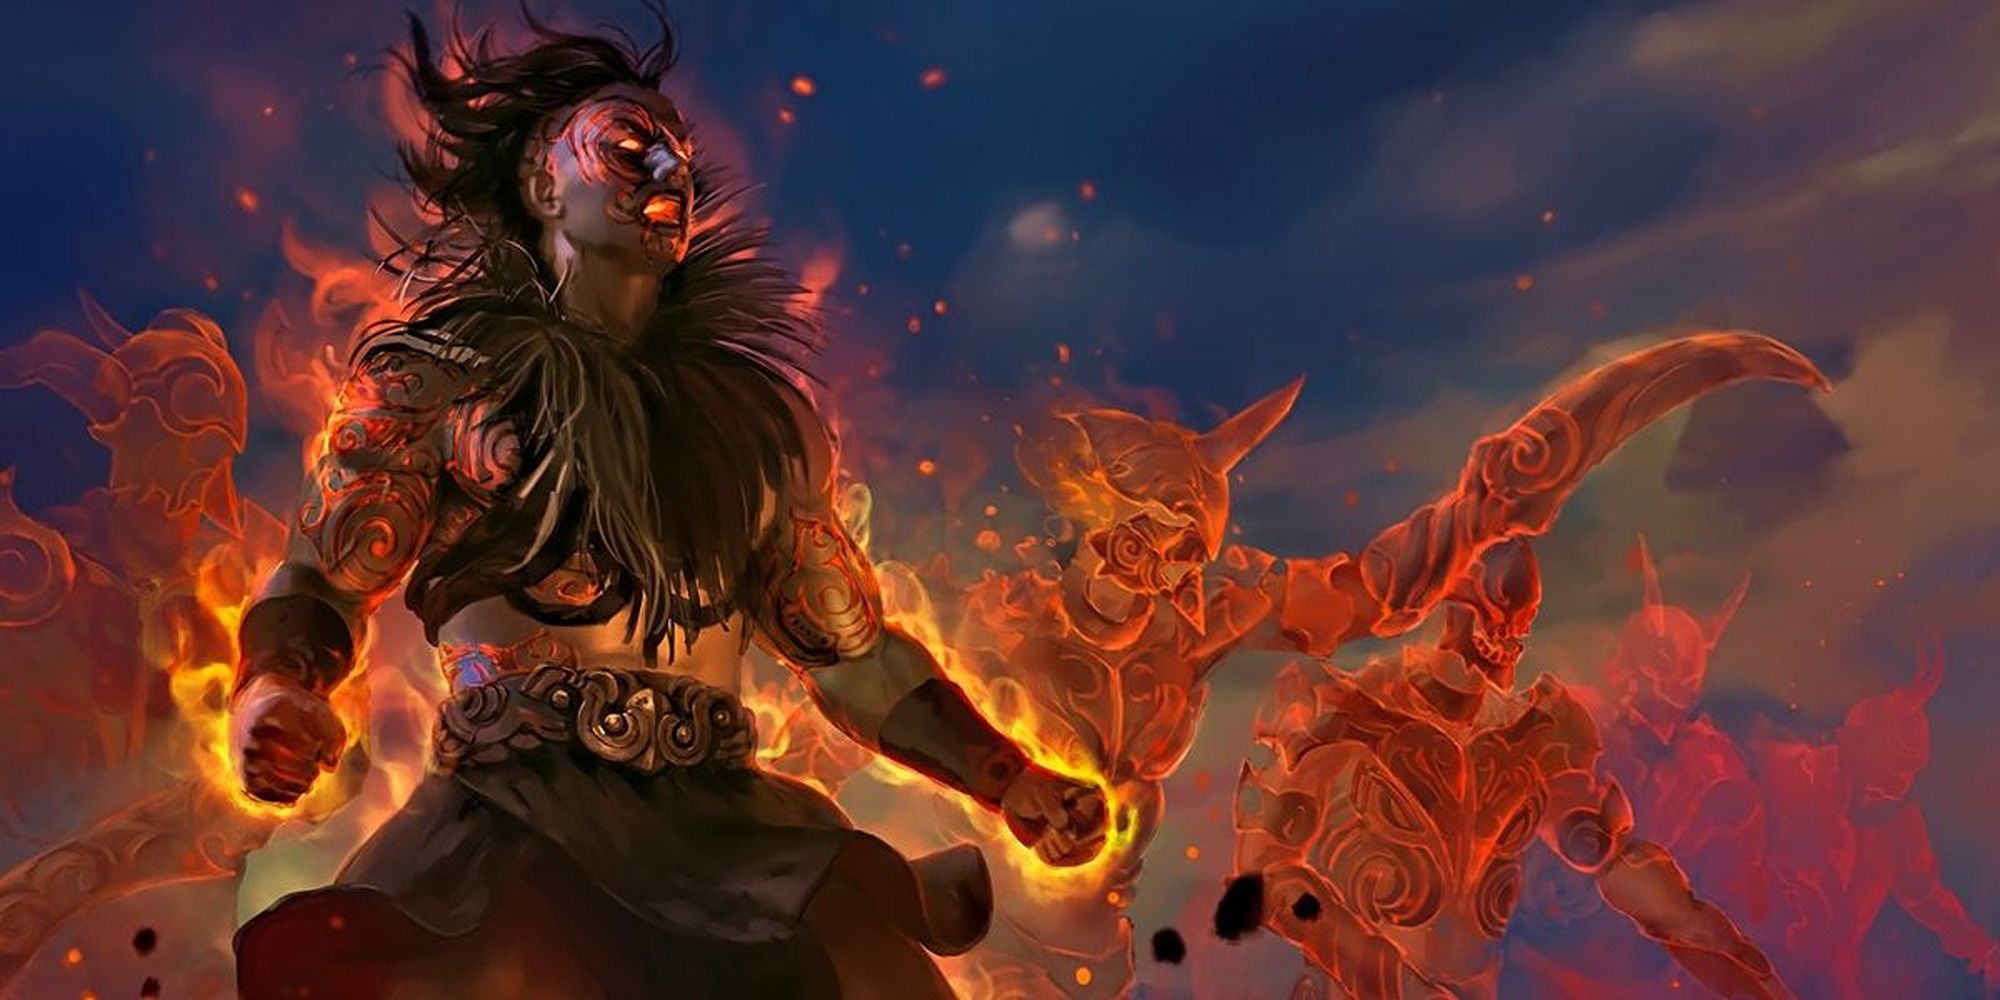 Path Of Exile Crucible DLC Adds New Skill Trees, Weapons, And More